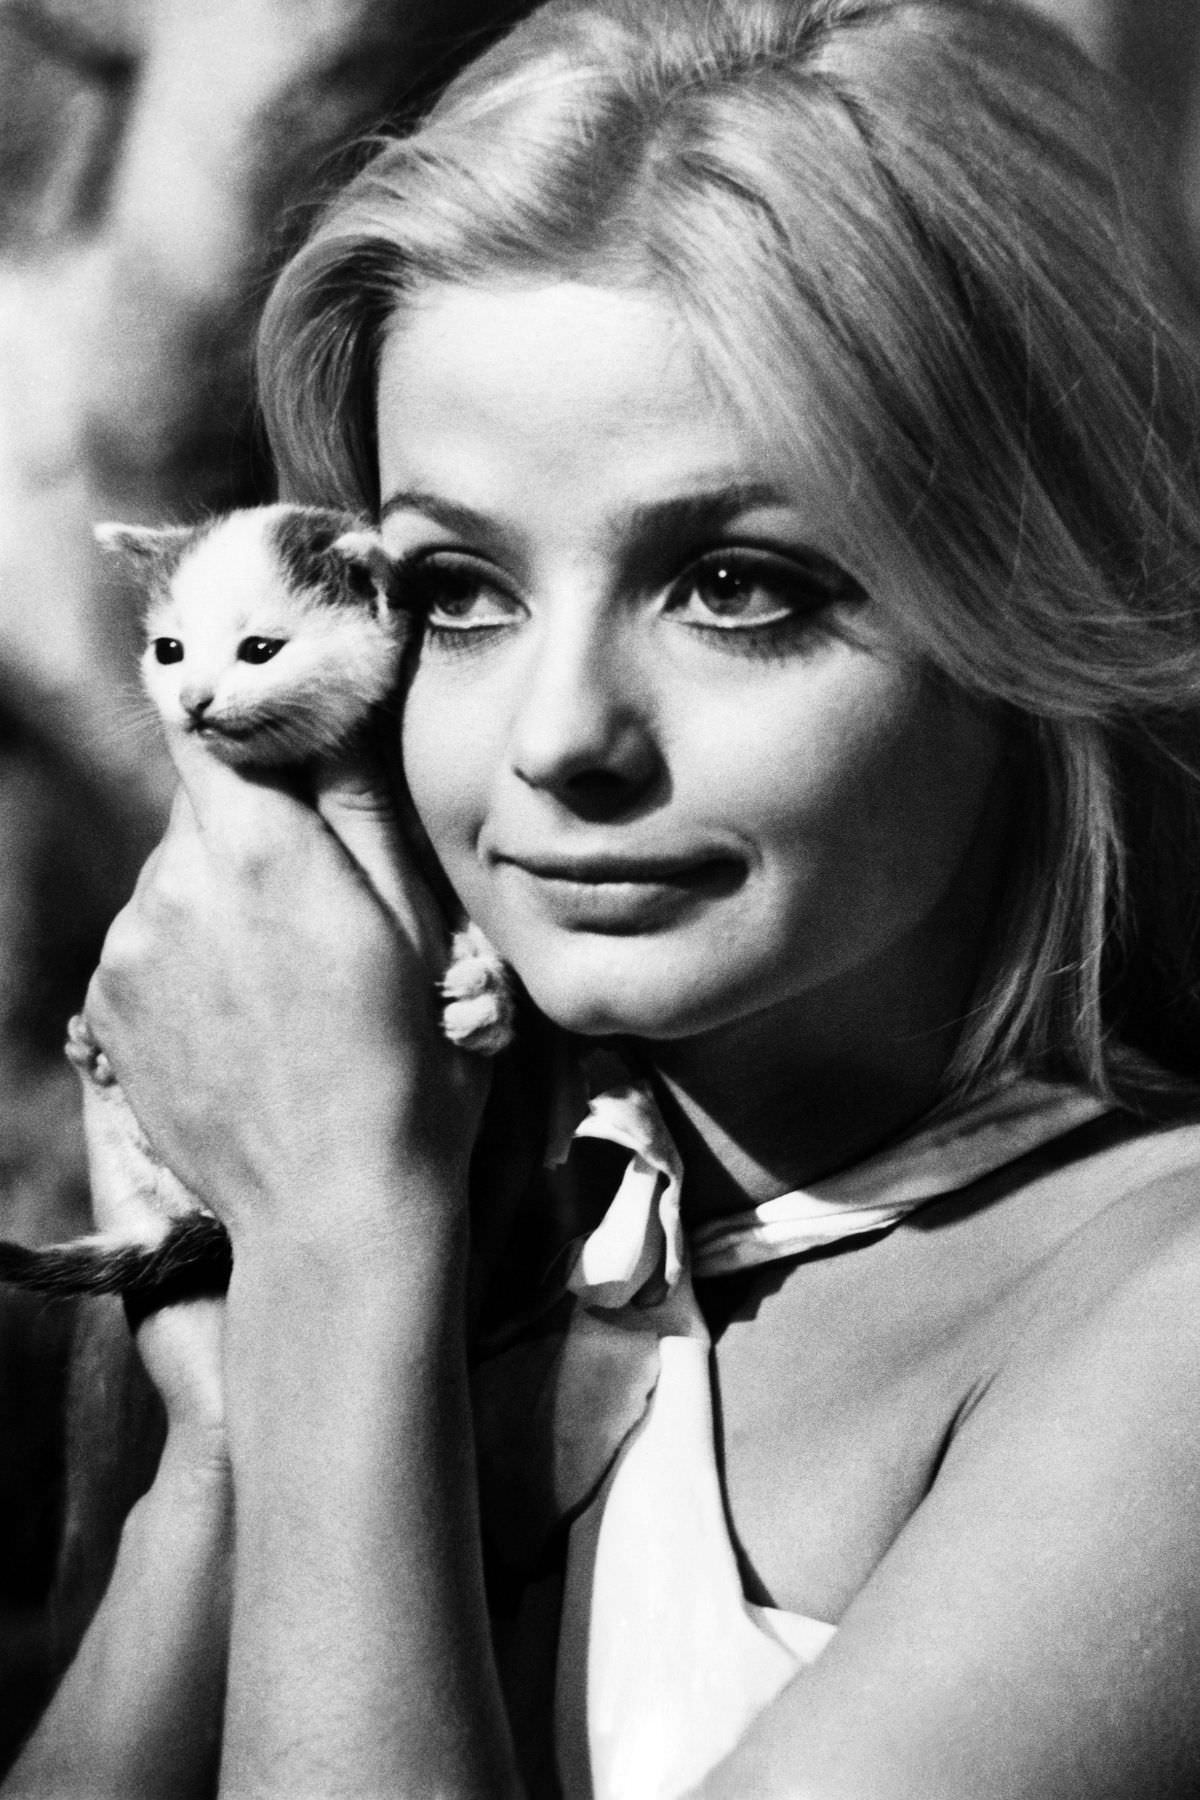 The Swedish actress Ewa Aulin posed with a minuscule feline named Hurricane in July 1968.